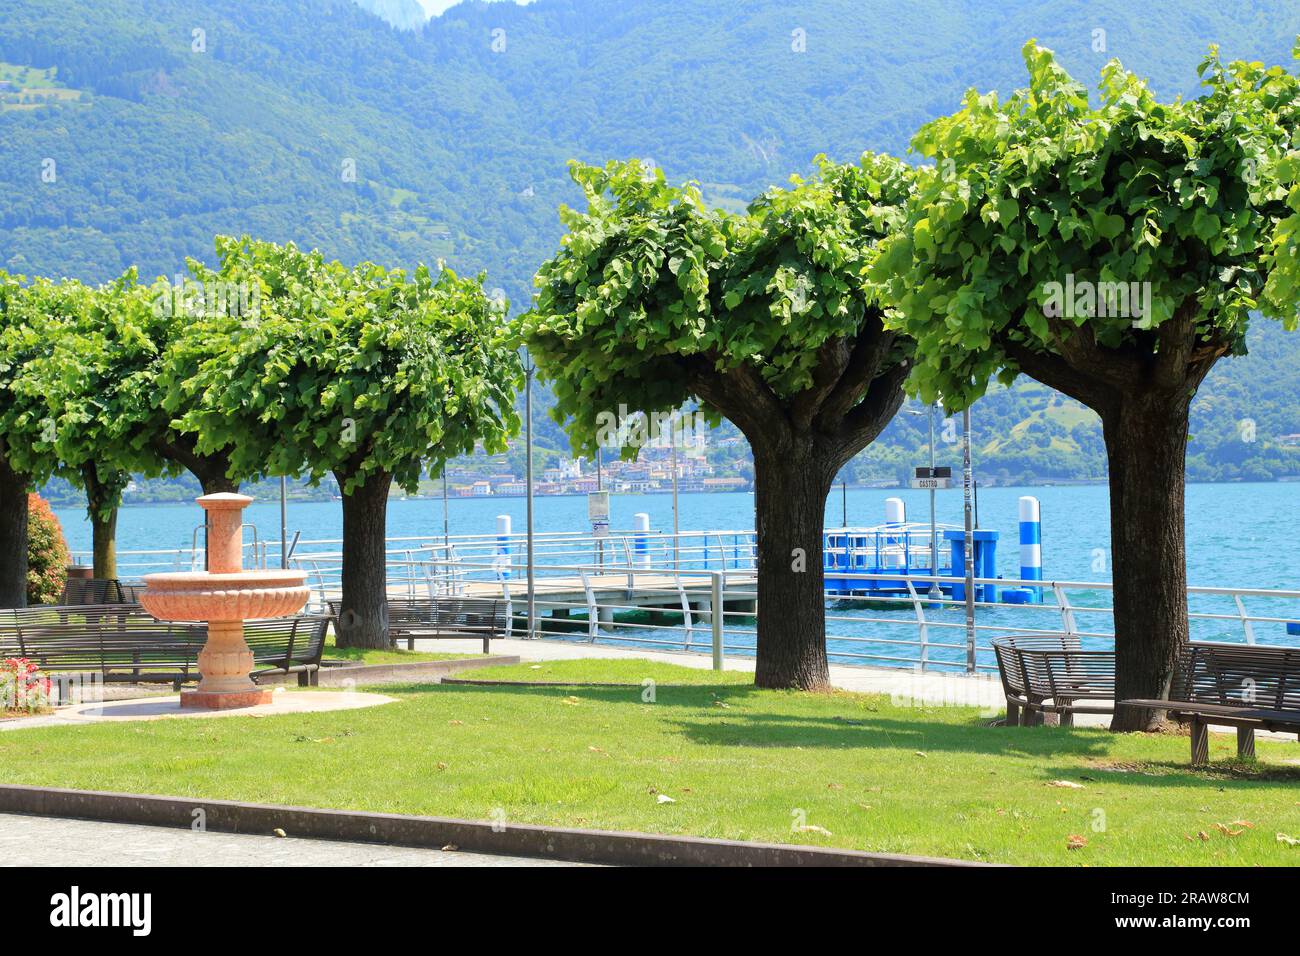 Lake Iseo, Castro town. Lago d'Iseo, Iseosee, Italy Stock Photo